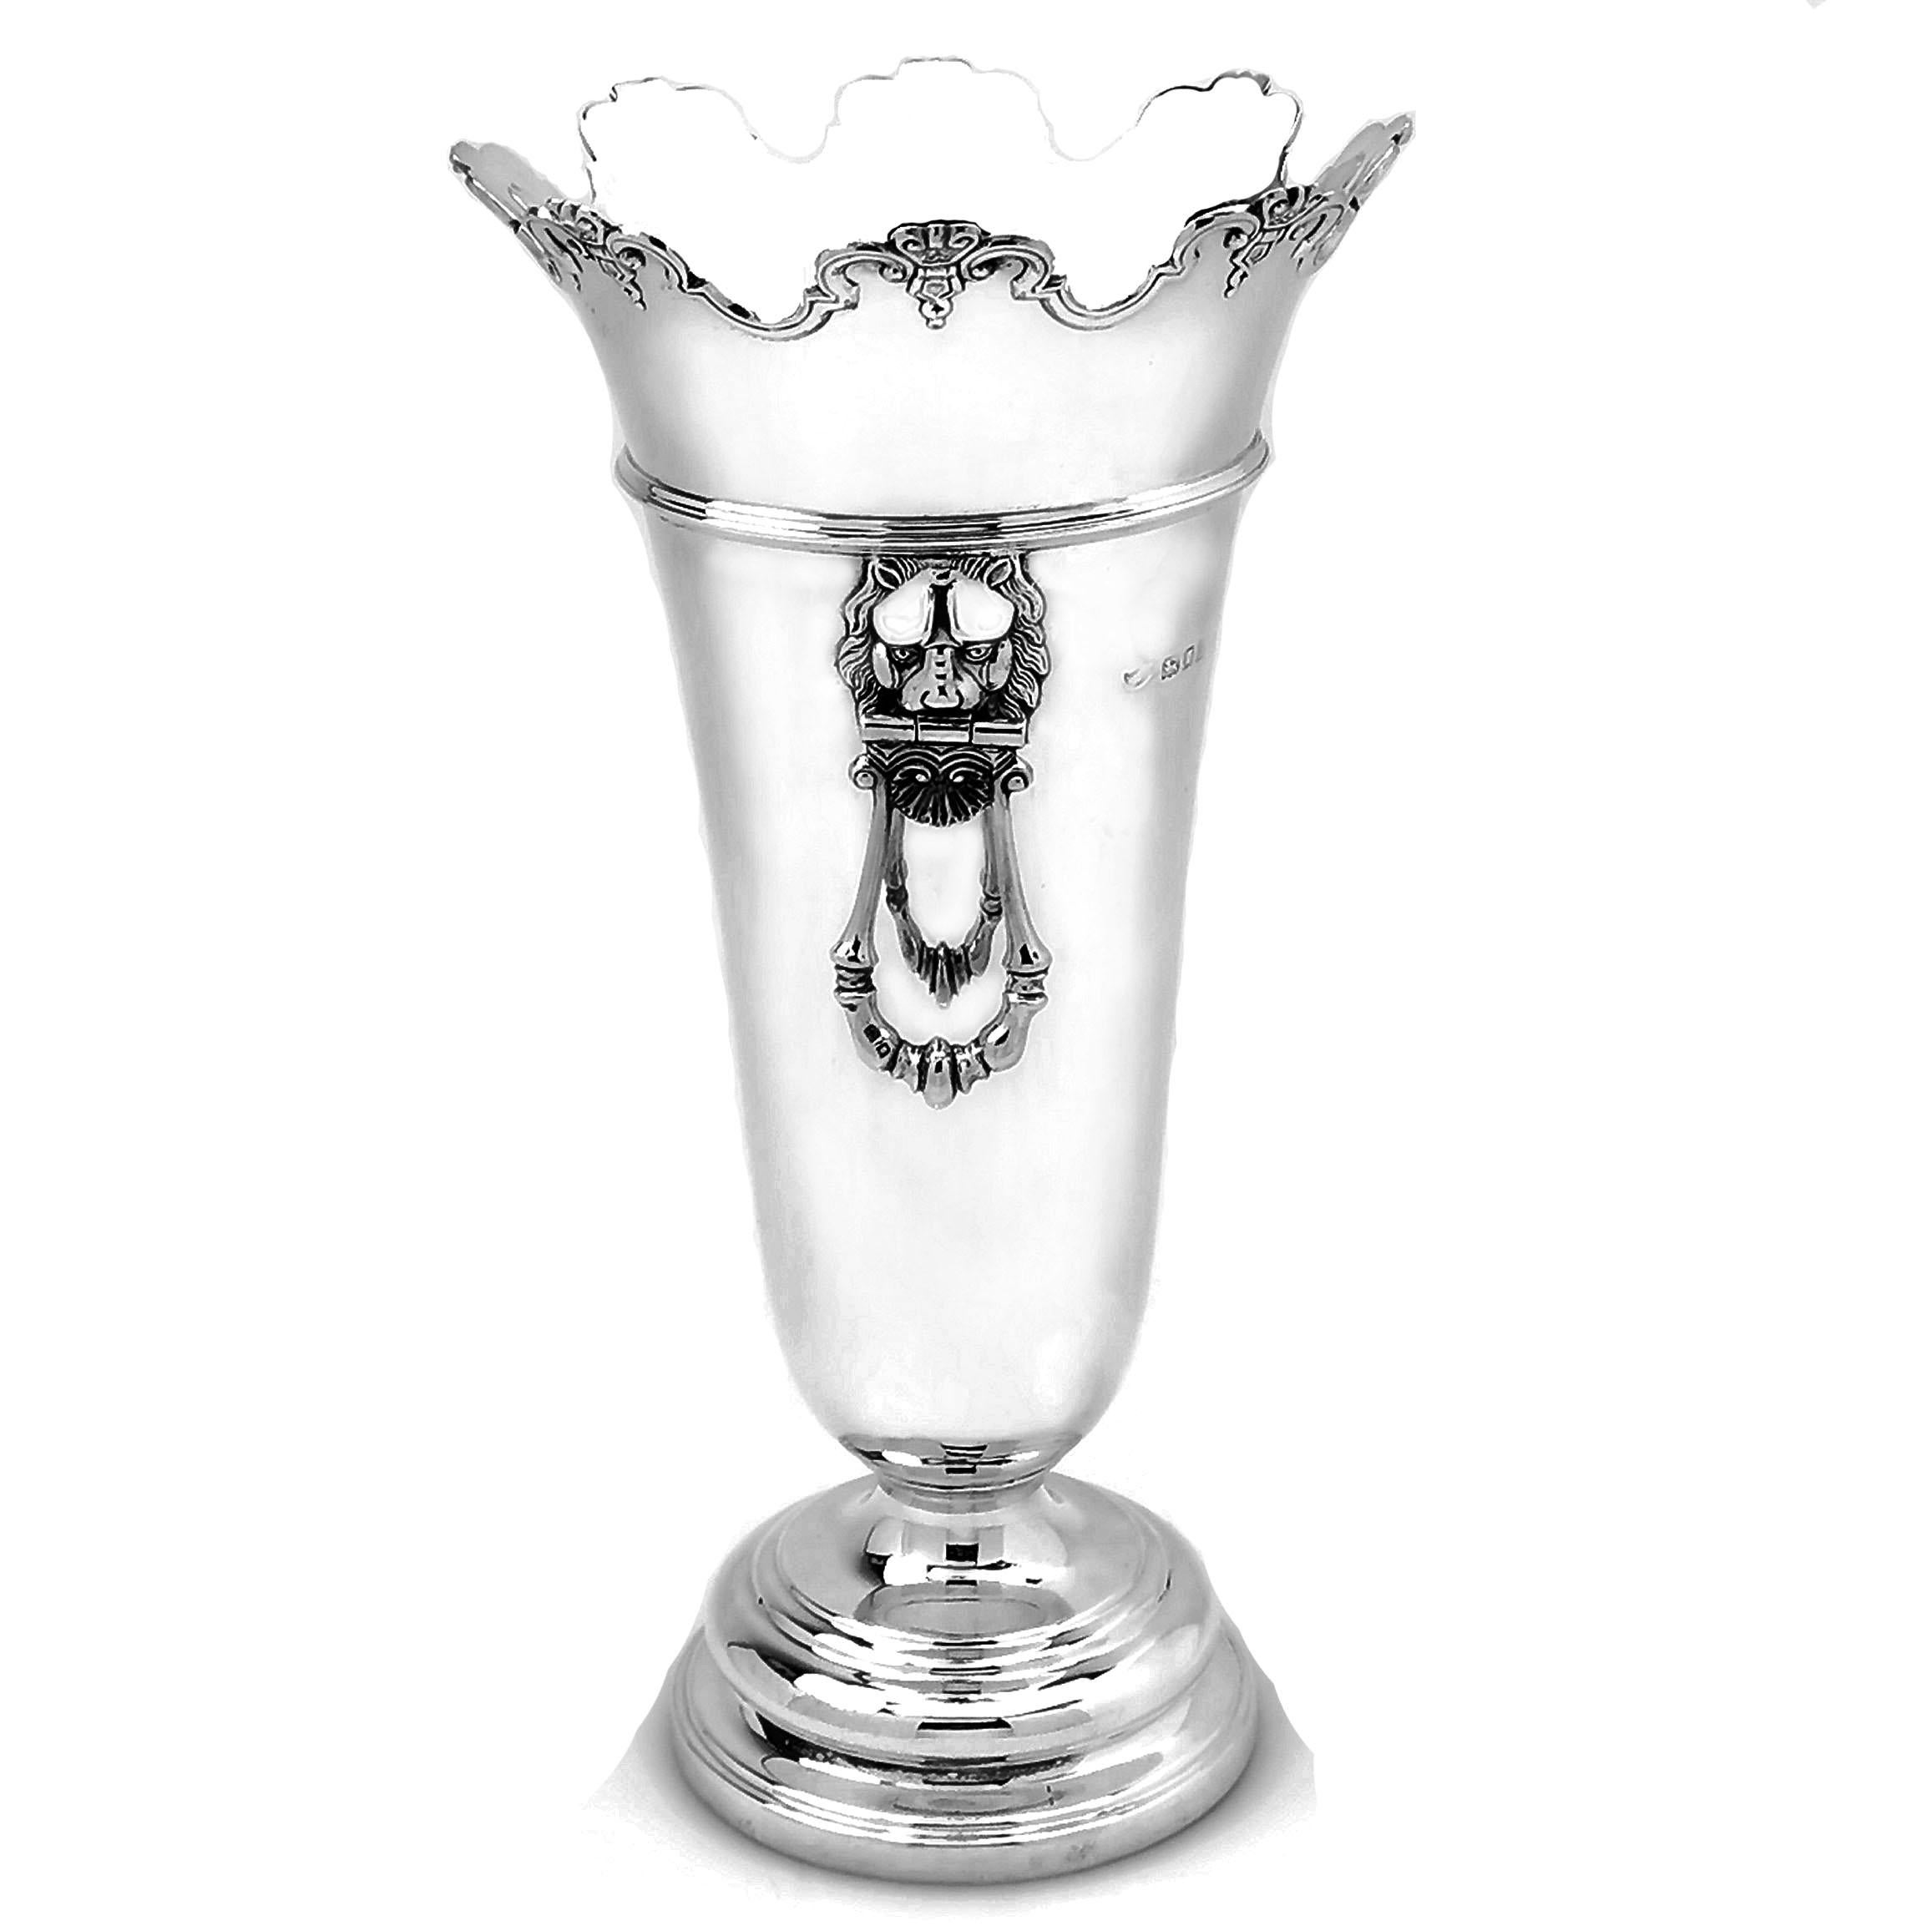 An elegant solid Silver Vase with a simple trumpet shape and standing on a spread pedestal foot. The Vase has a shaped rim and a pair of impressive lion head handles.

This Vase was made in London in 1923 by Hawksworth and Eyre. 

Approx. Weight -